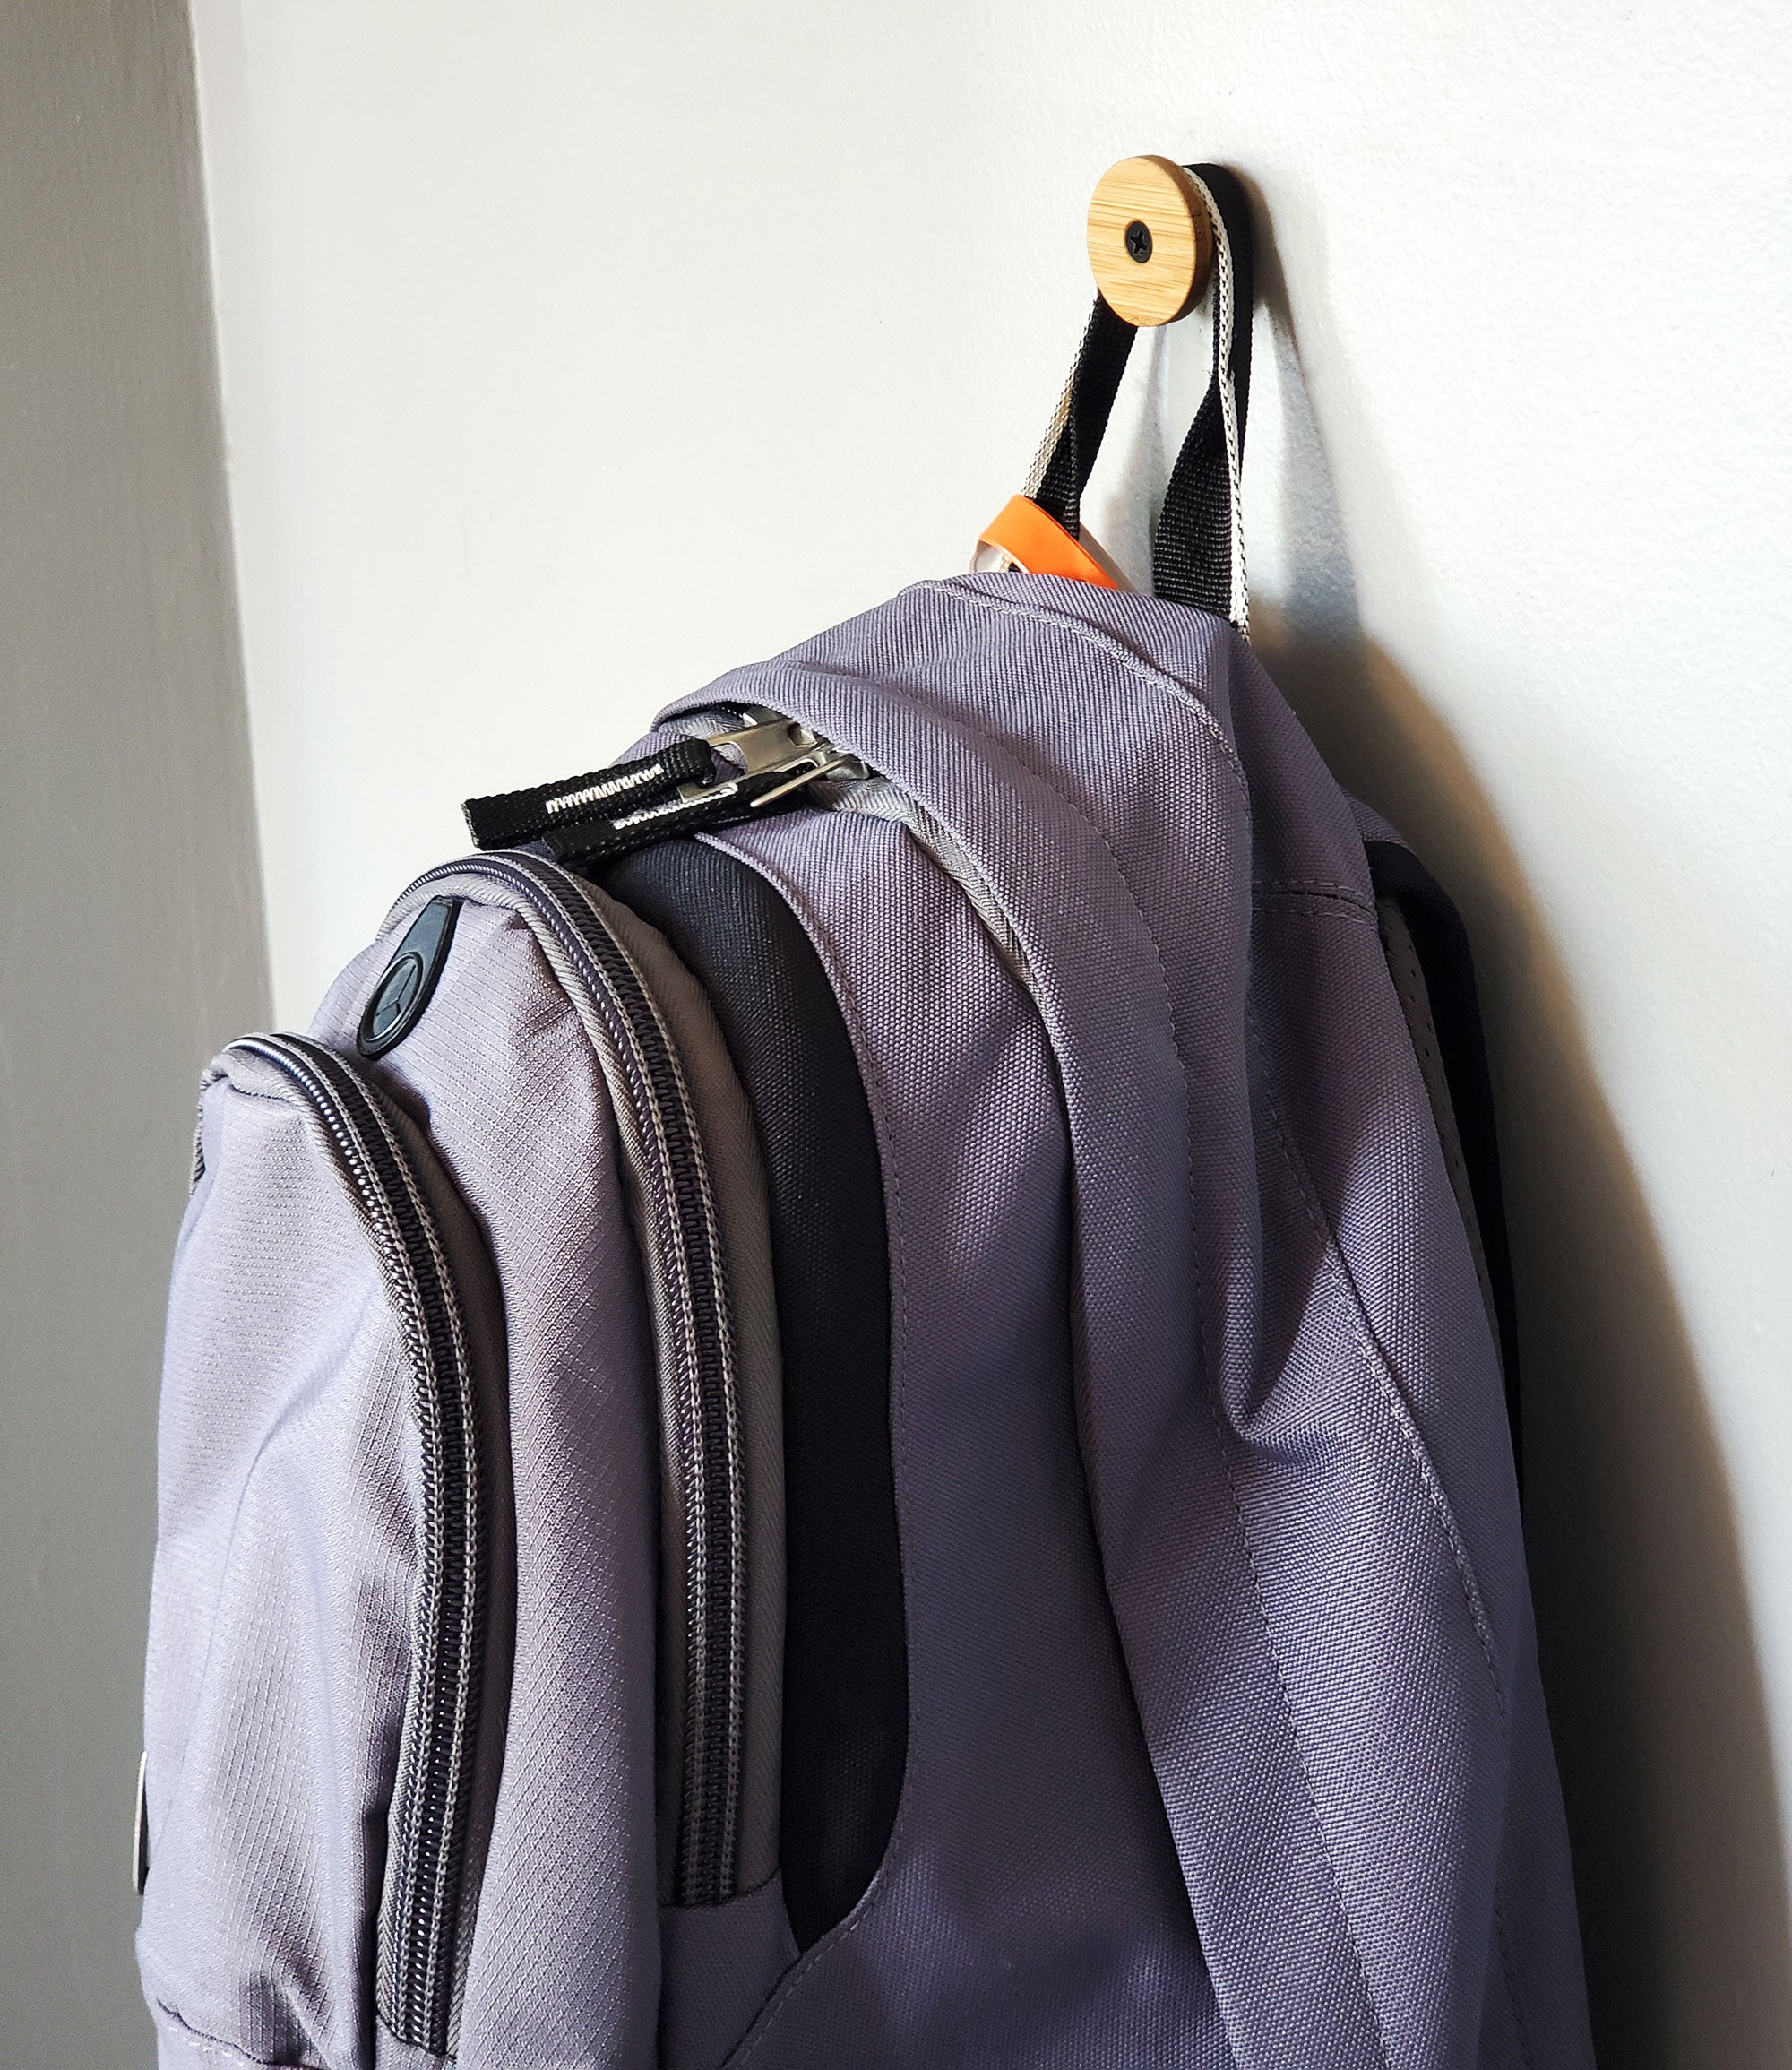 Simple Backpack Storage for wall